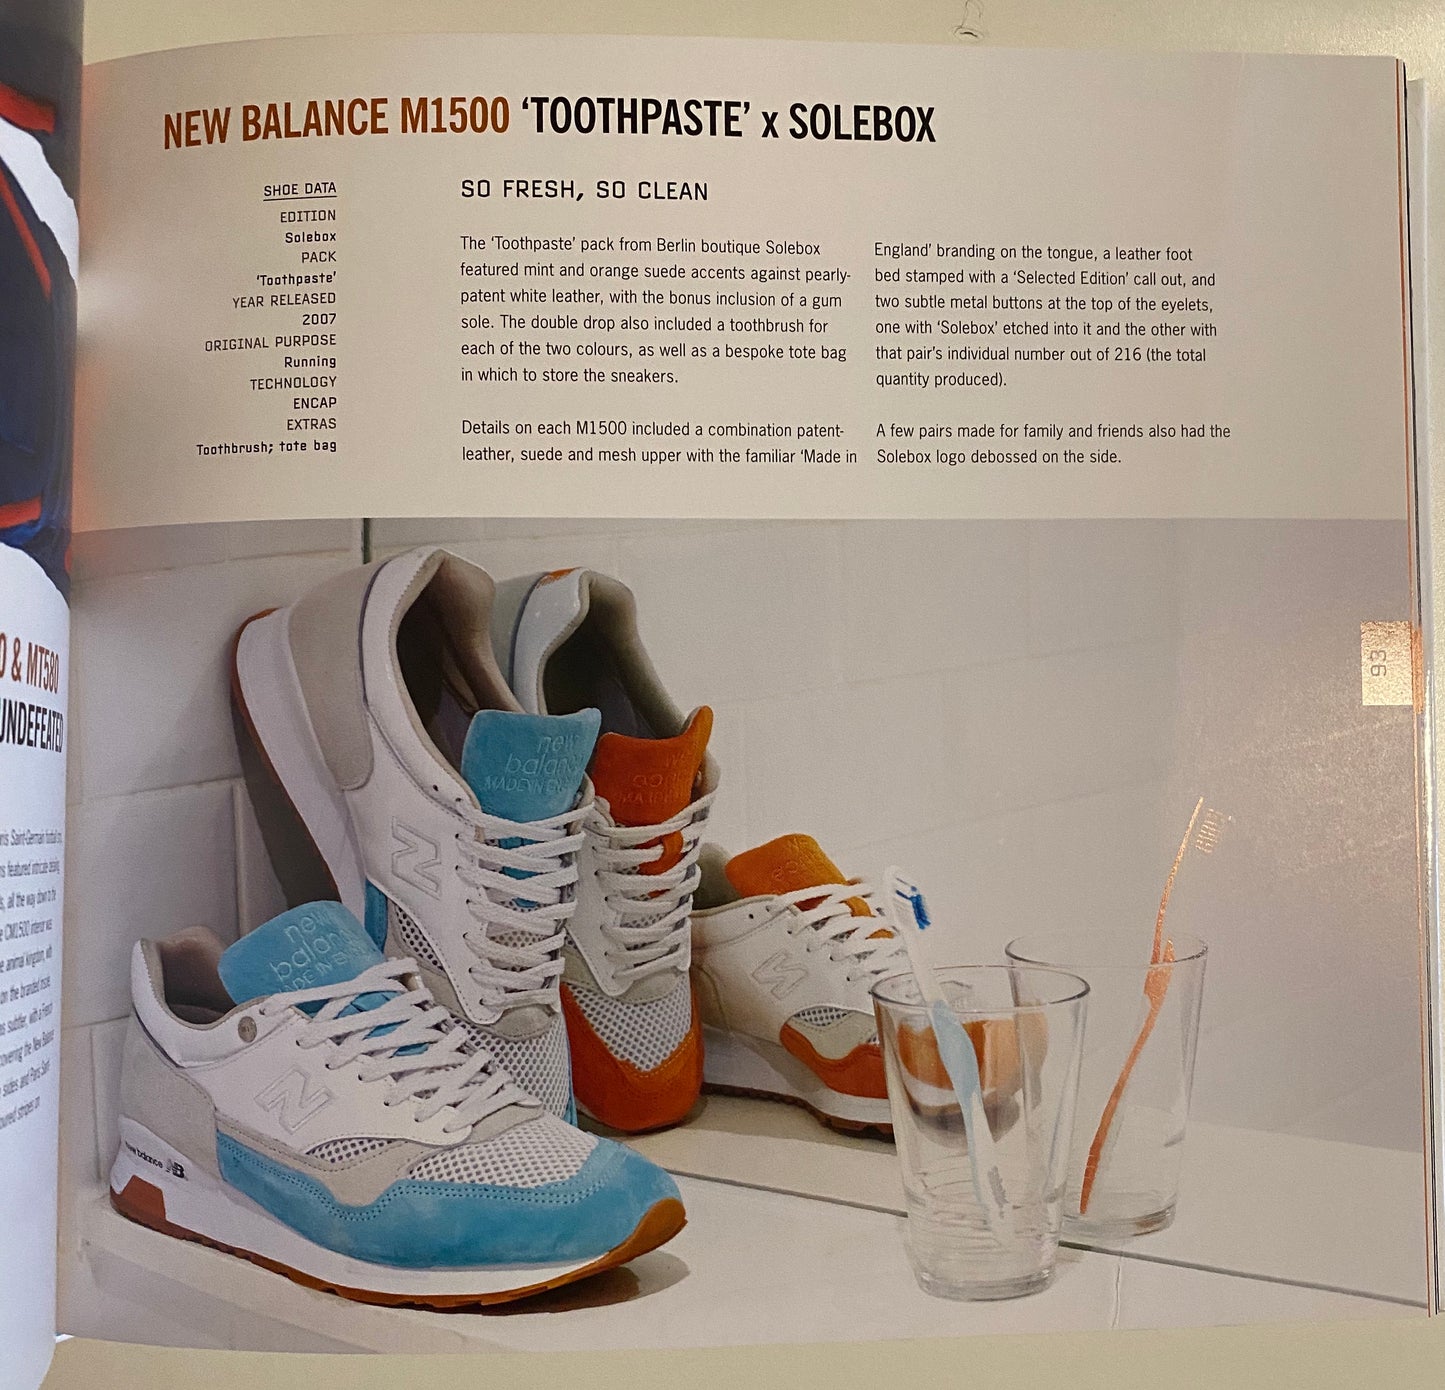 Sneakers: The Complete Limited Editions Guide Book - MoSneaks Shop Online